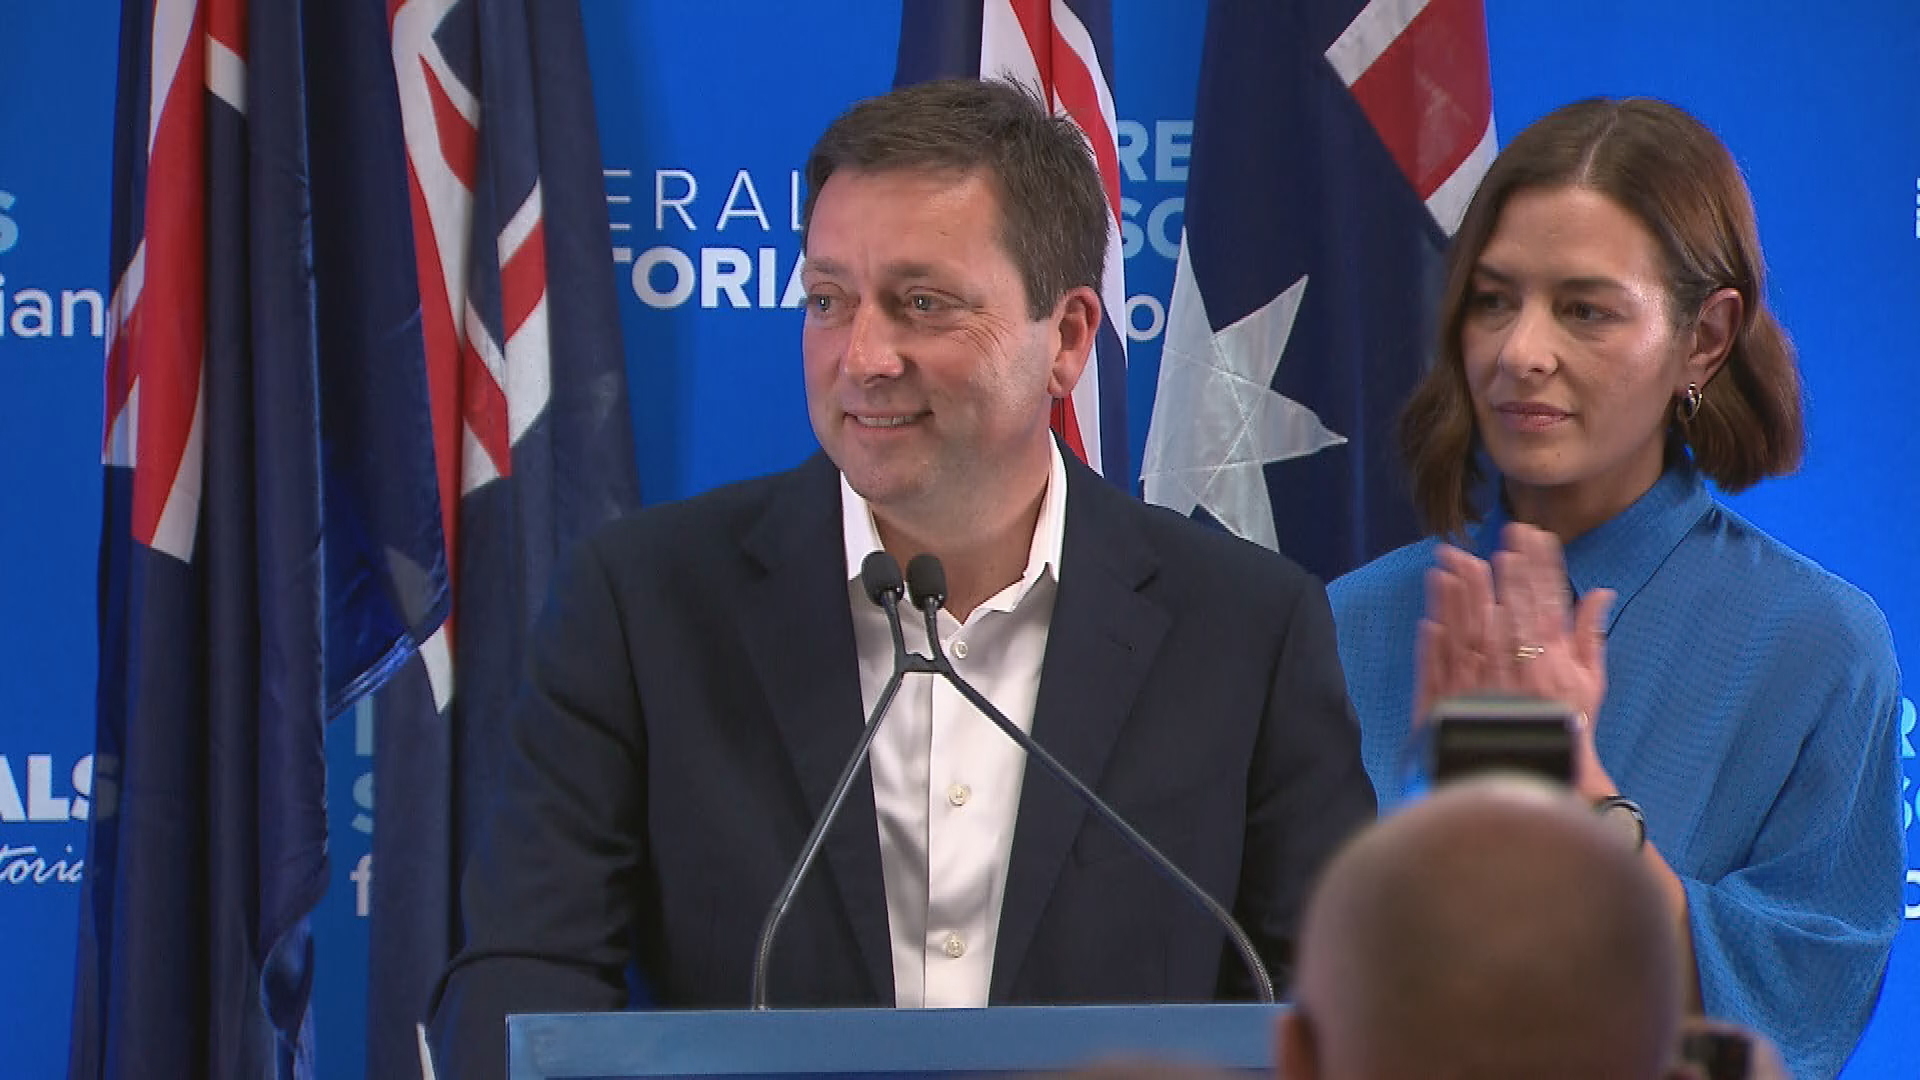 Opposition Leader Matthew Guy has conceded.